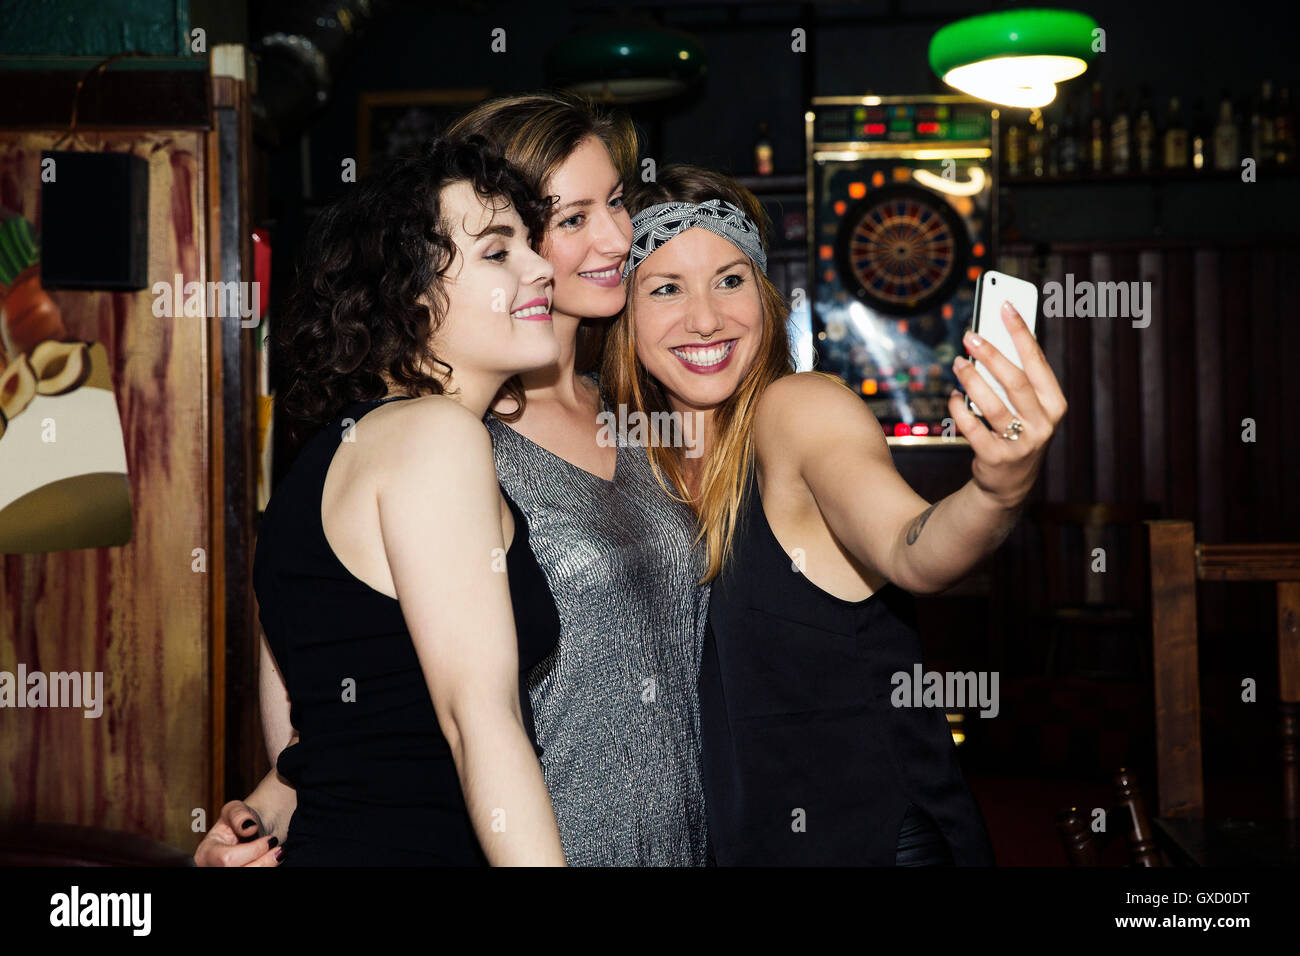 Three adult female friends taking smartphone selfie on night out in bar Stock Photo